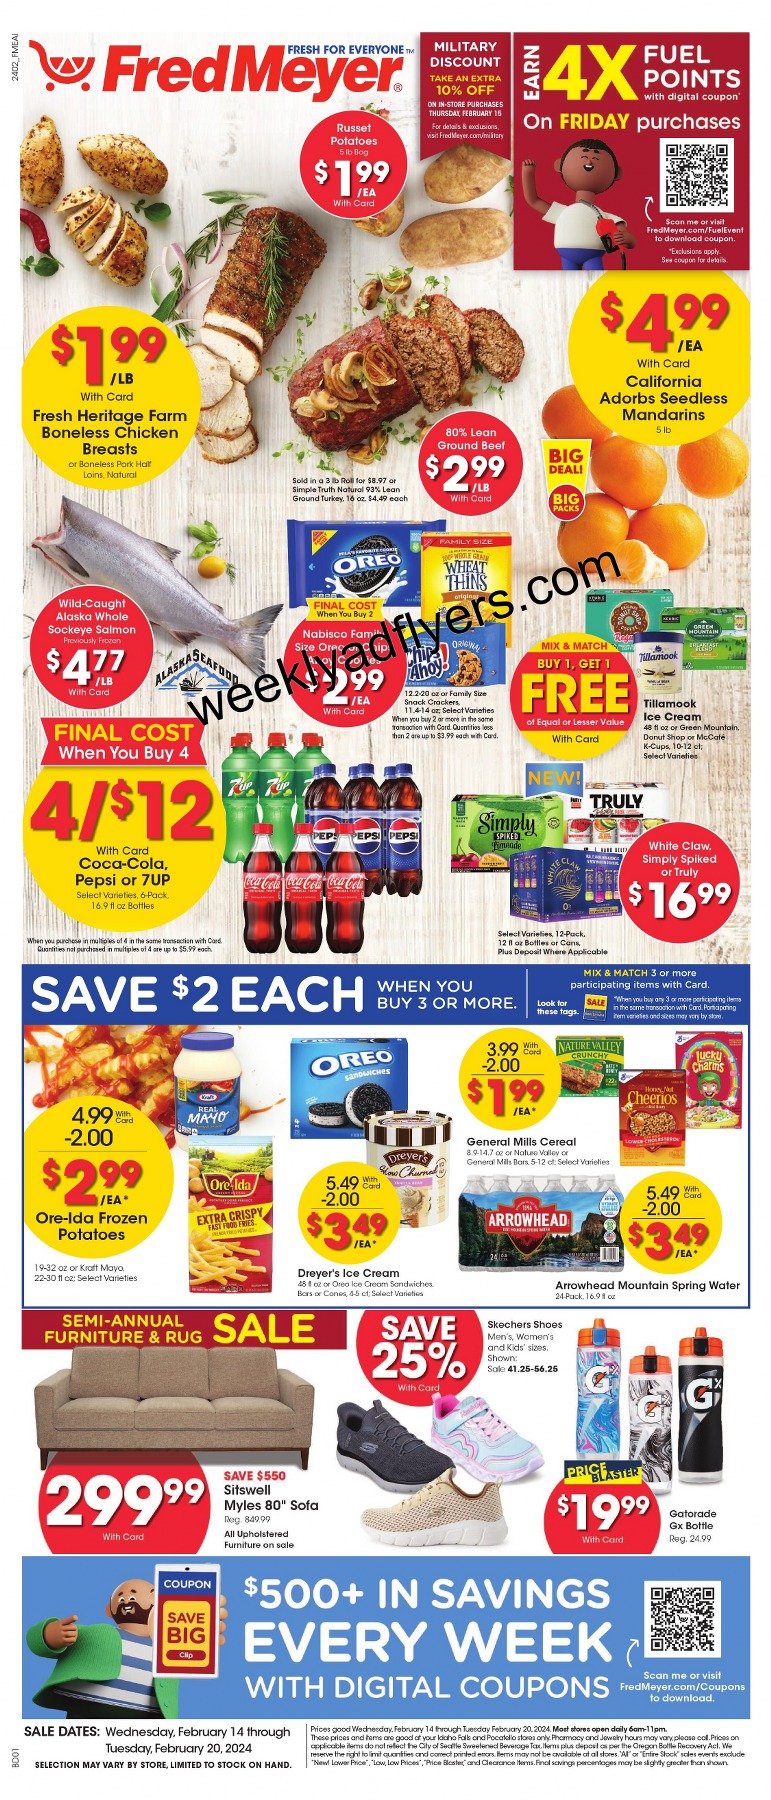 Fred Meyer Weekly Ad February 14 to February 20, 2024 1 – fred meyer ad 1 1